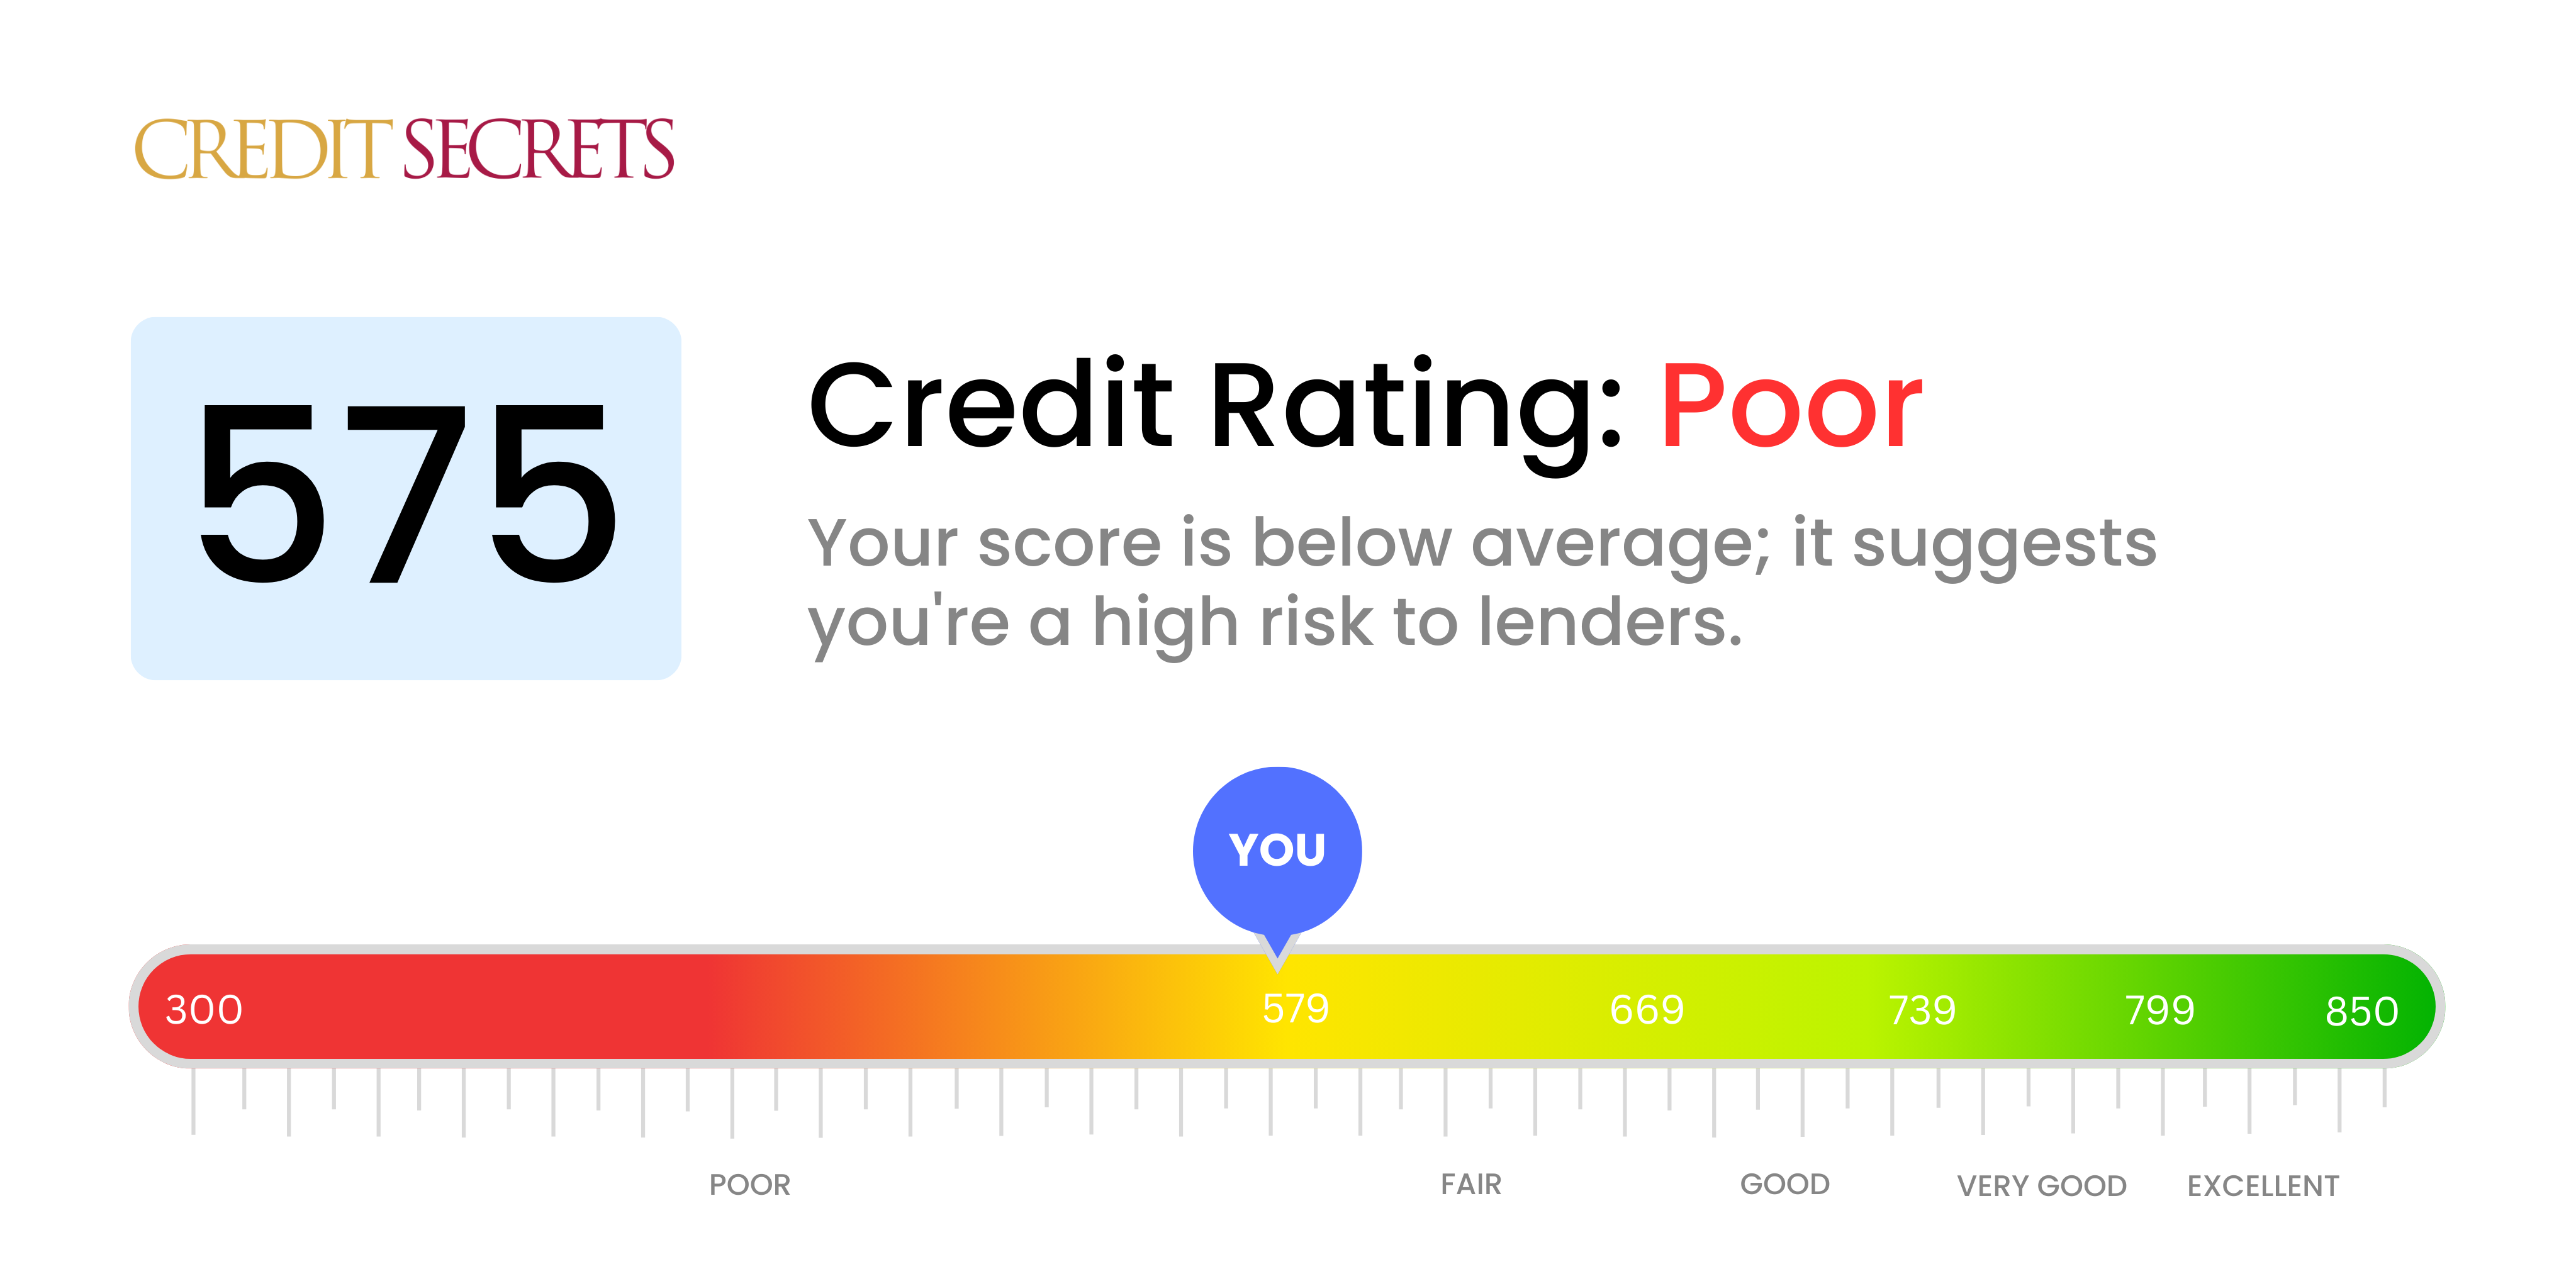 Is 575 a good credit score?